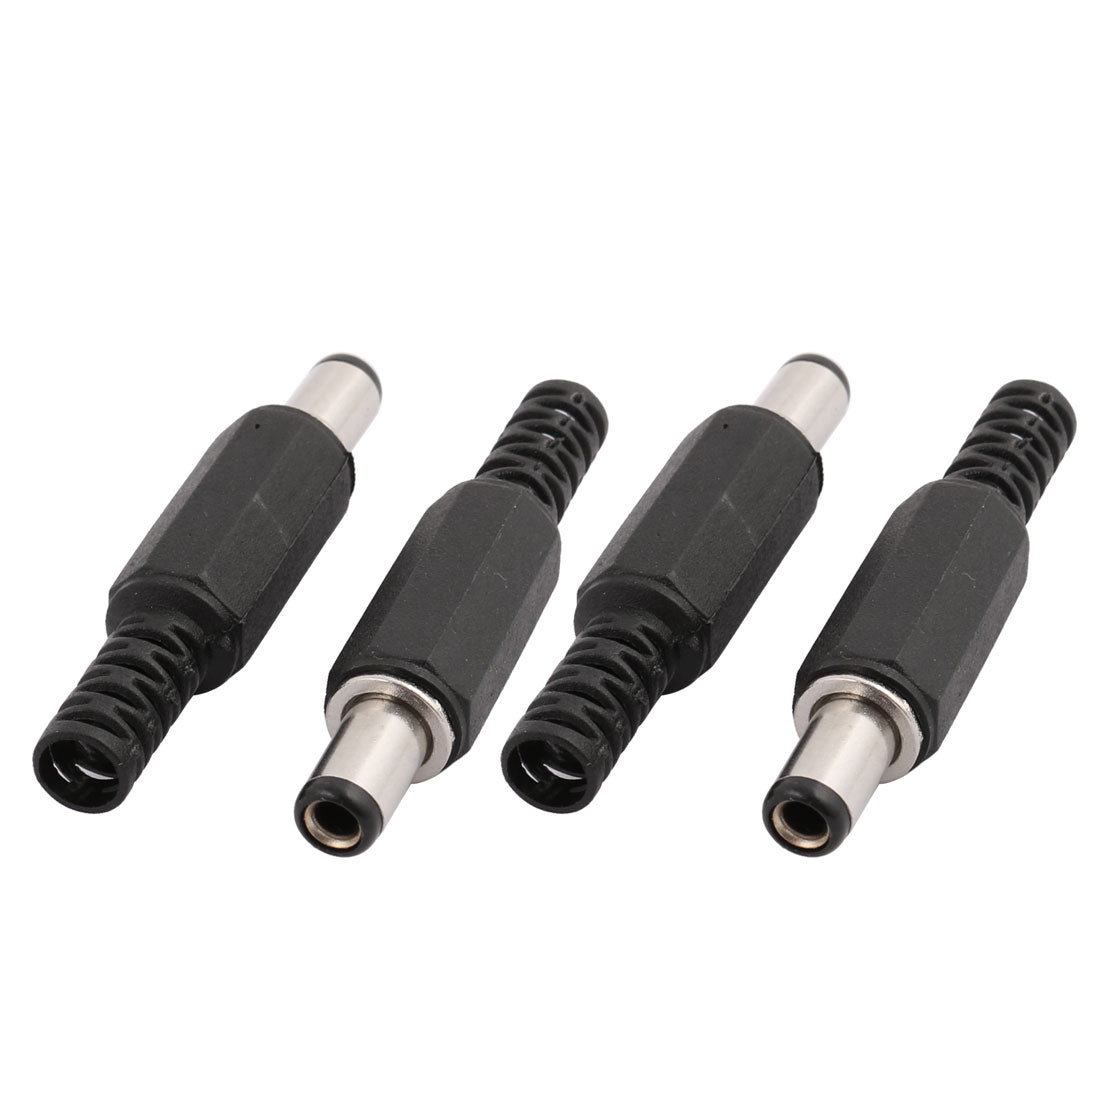 uxcell Uxcell 4Pcs 5.5mm x 2.5mm x 9mm DC Plug Male Solder Power Tip Straight Connector